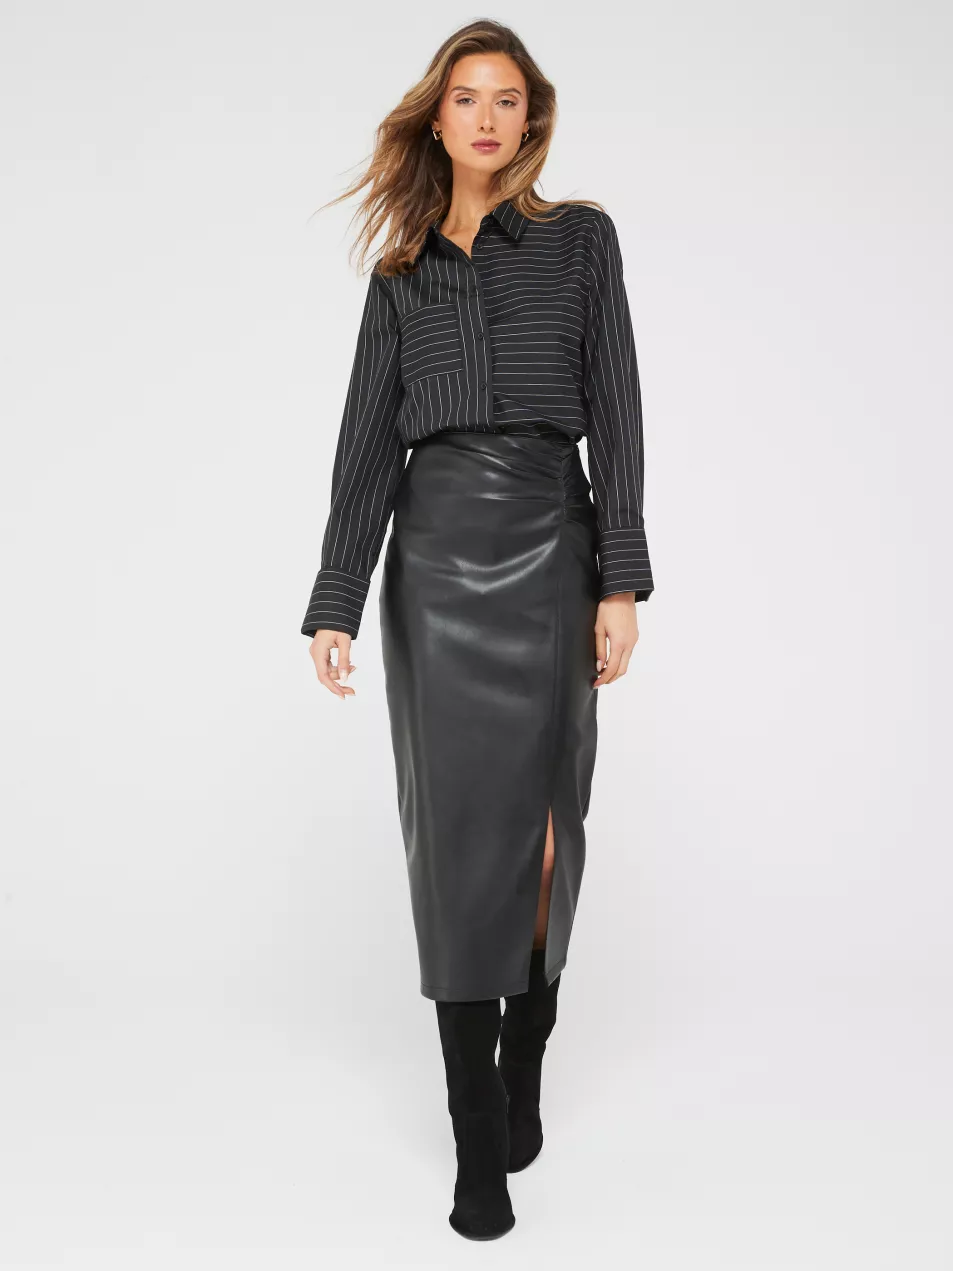 Fig & Basil Ls Pinstripe Shirt; Fig & Basil PU Ruched Midi Skirt; V by Very Wide Fit Block Heel Slouch Knee Boot With Wider Fitting Calf